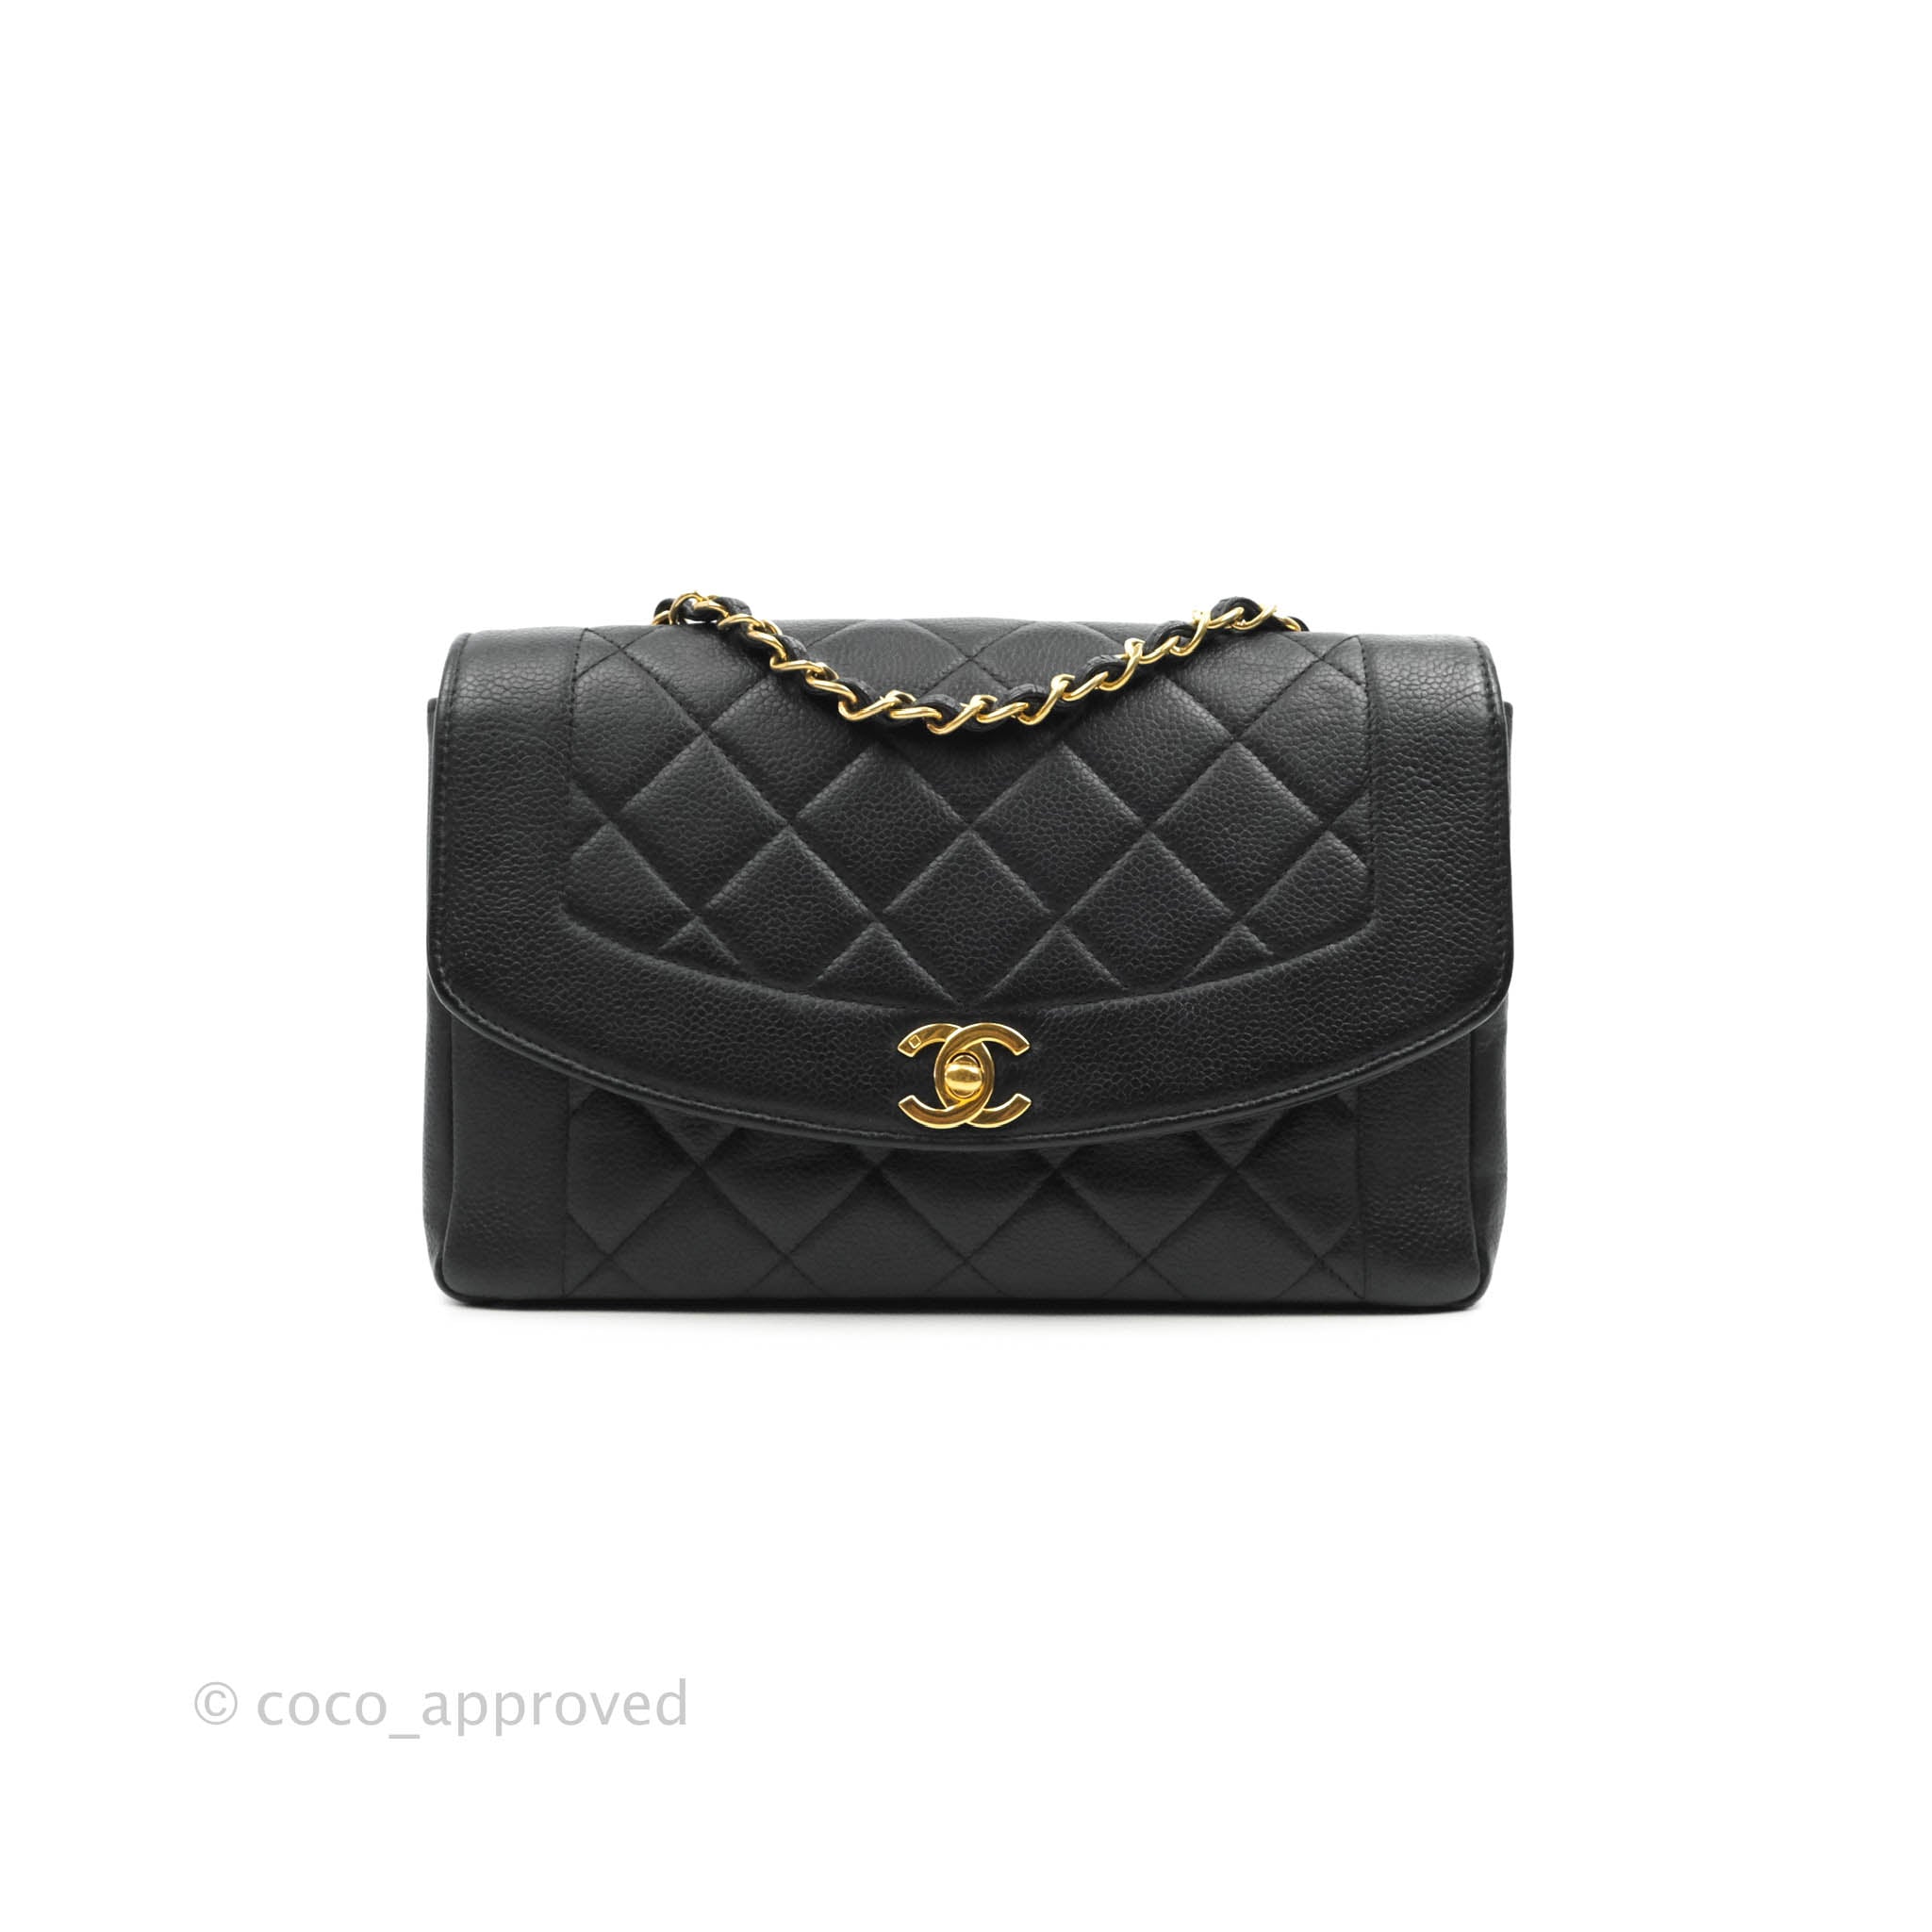 Chanel Diana Bag. Complete Guide (sizes, materials, prices & more) - Luxe  Front